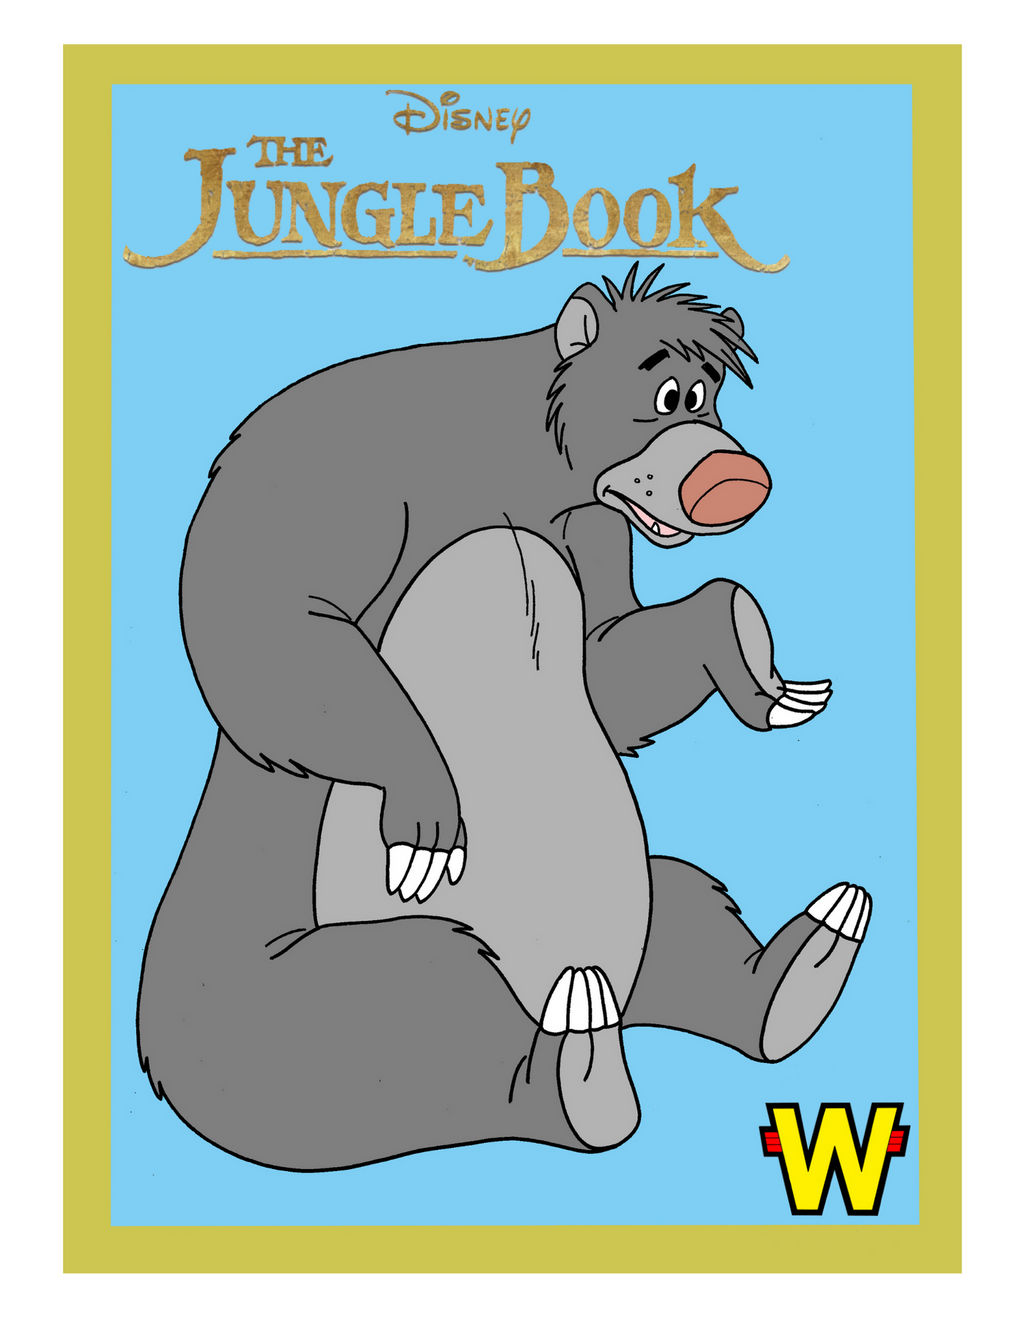 Baloo The Bear From Disneys The Jungle Book by donandron on DeviantArt